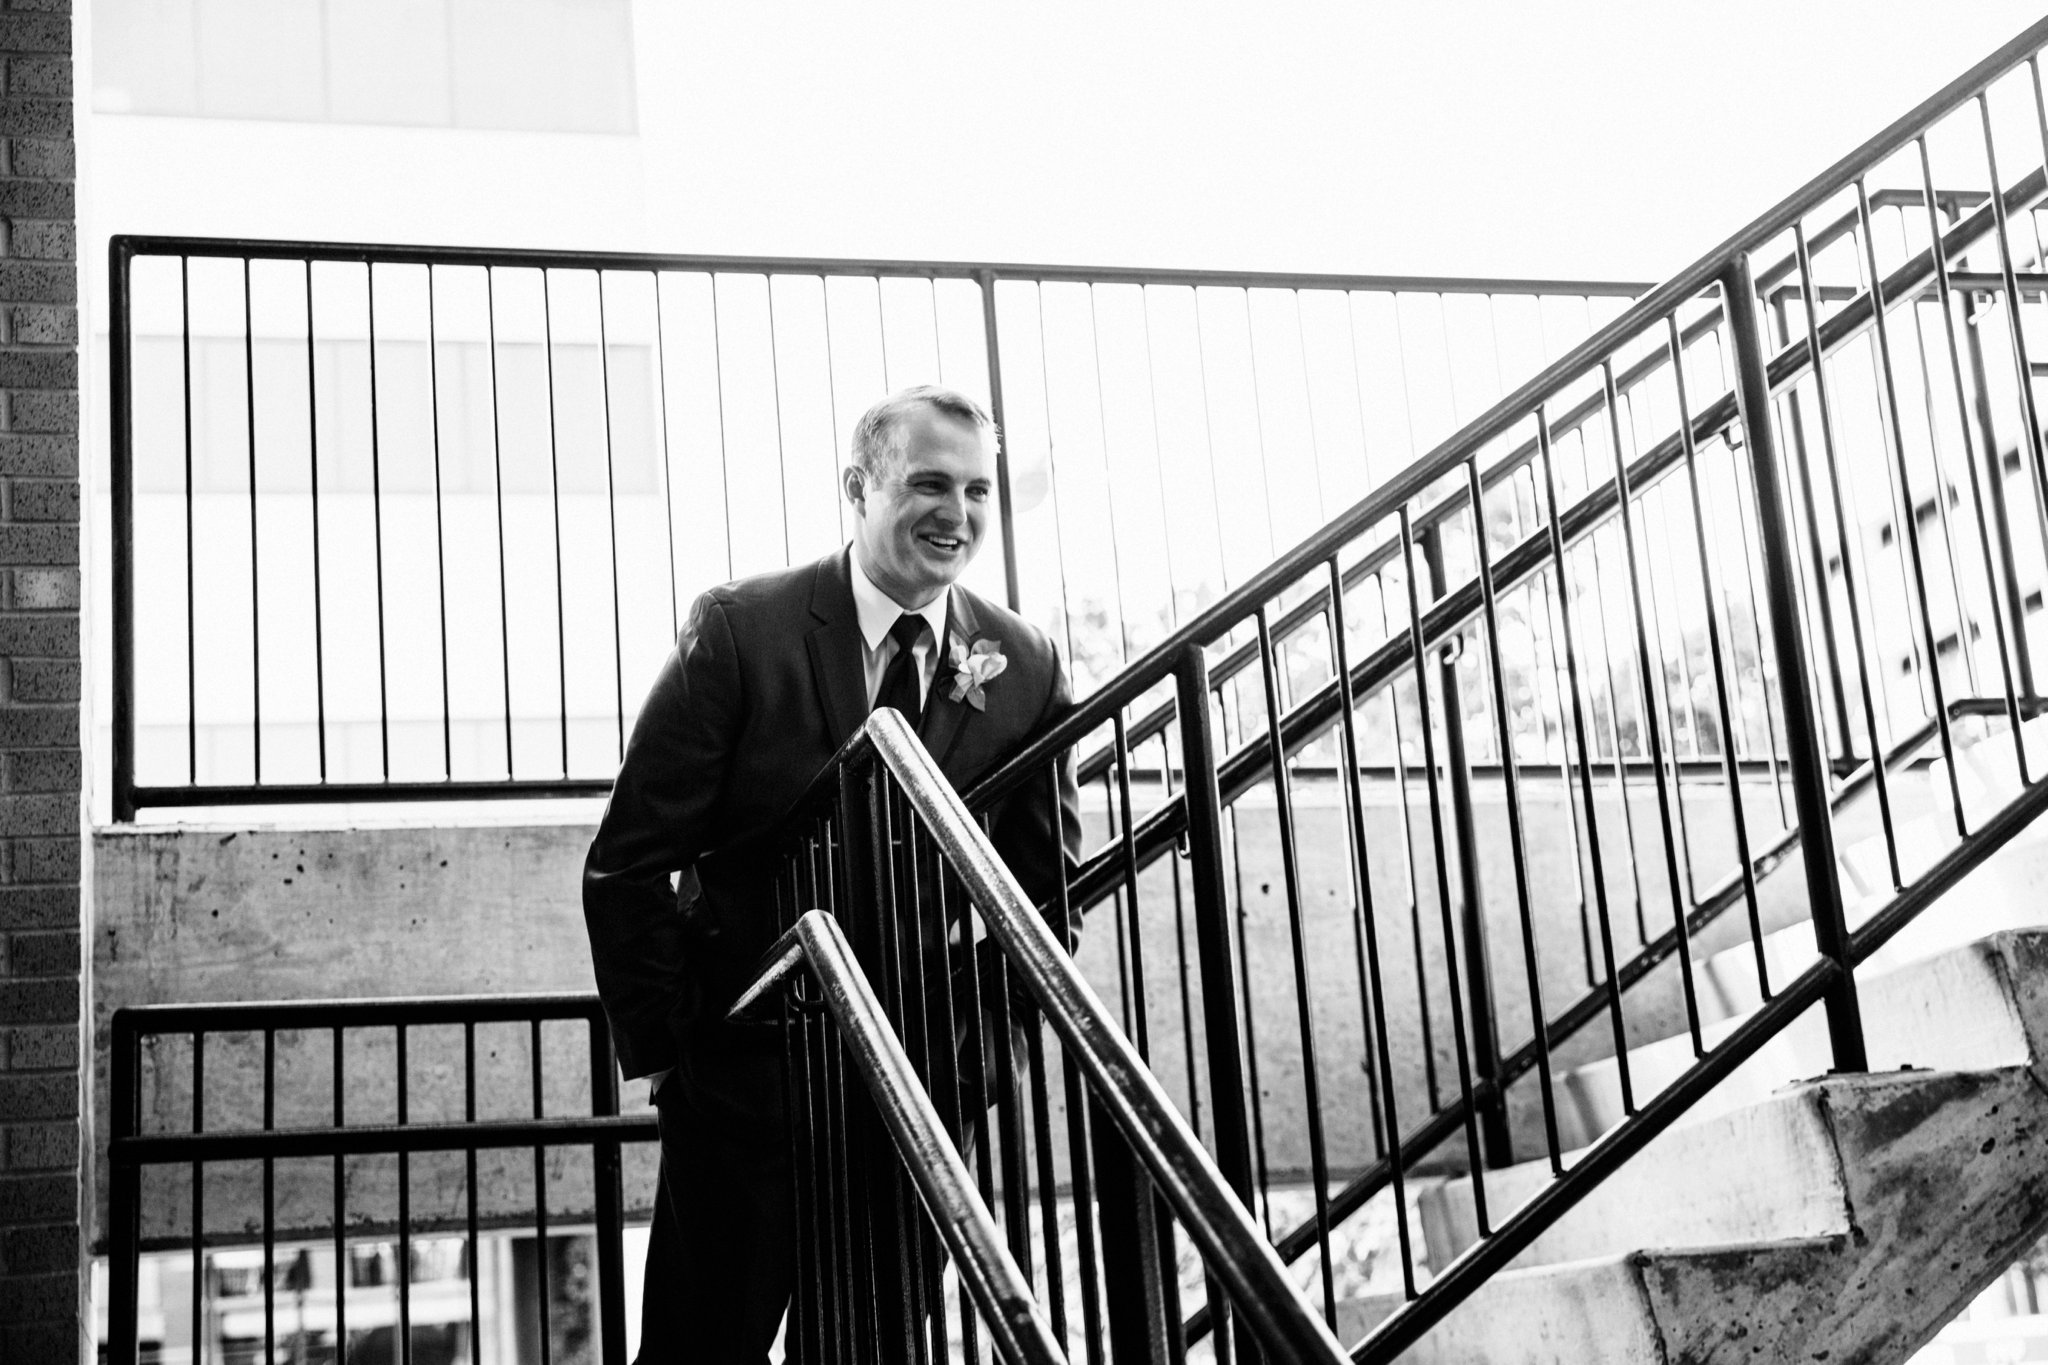 black and white | wedding | wedding photos | wedding photography | images by feliciathephotographer.com | Country Club Plaza | Kansas City | Unity Temple | first look | groom solo shot | staircase meeting | groom reaction | 